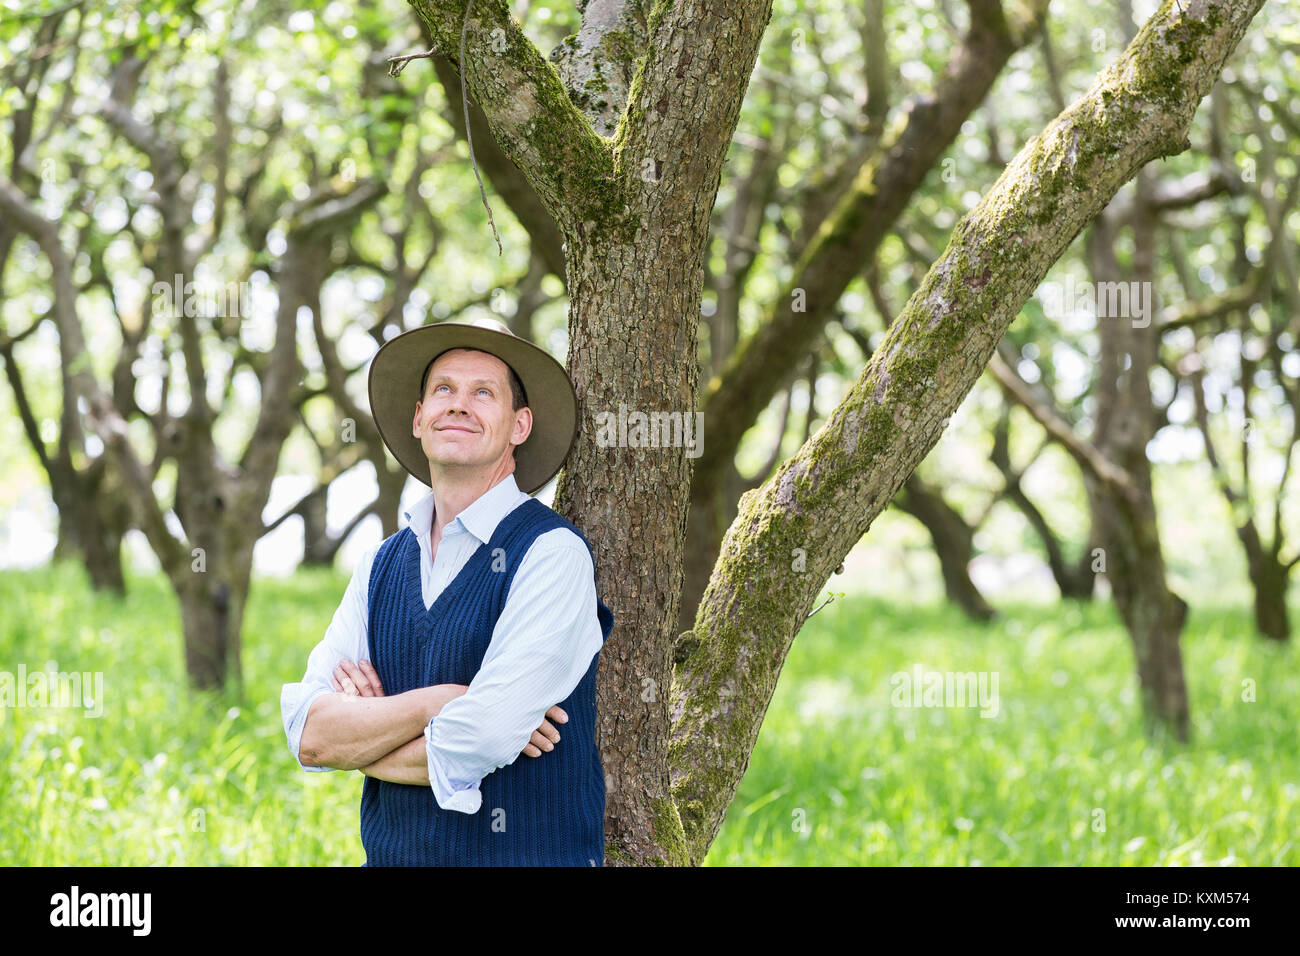 Portrait of man arms folded looking up Stock Photo